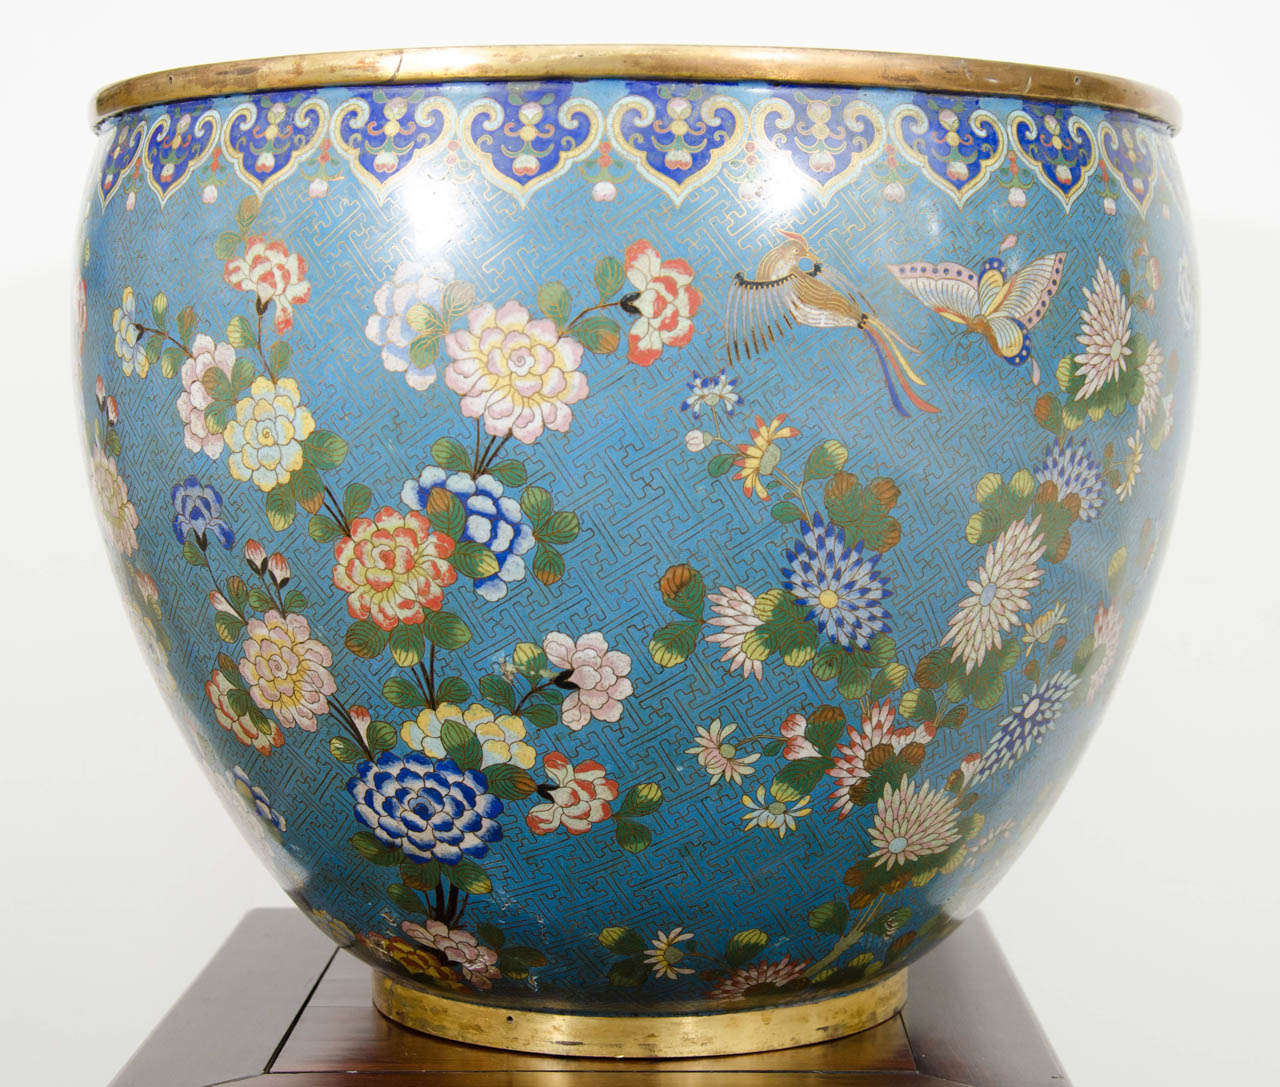 A large Chinese 19th Century Daoguang Period cloisonne fish bowl or planter decorated with multi-colored, flowers, birds and butterflies on a turquoise ground of gilt bronze fretwork and beneath a top border of cobalt blue and yellow ruyi shapes